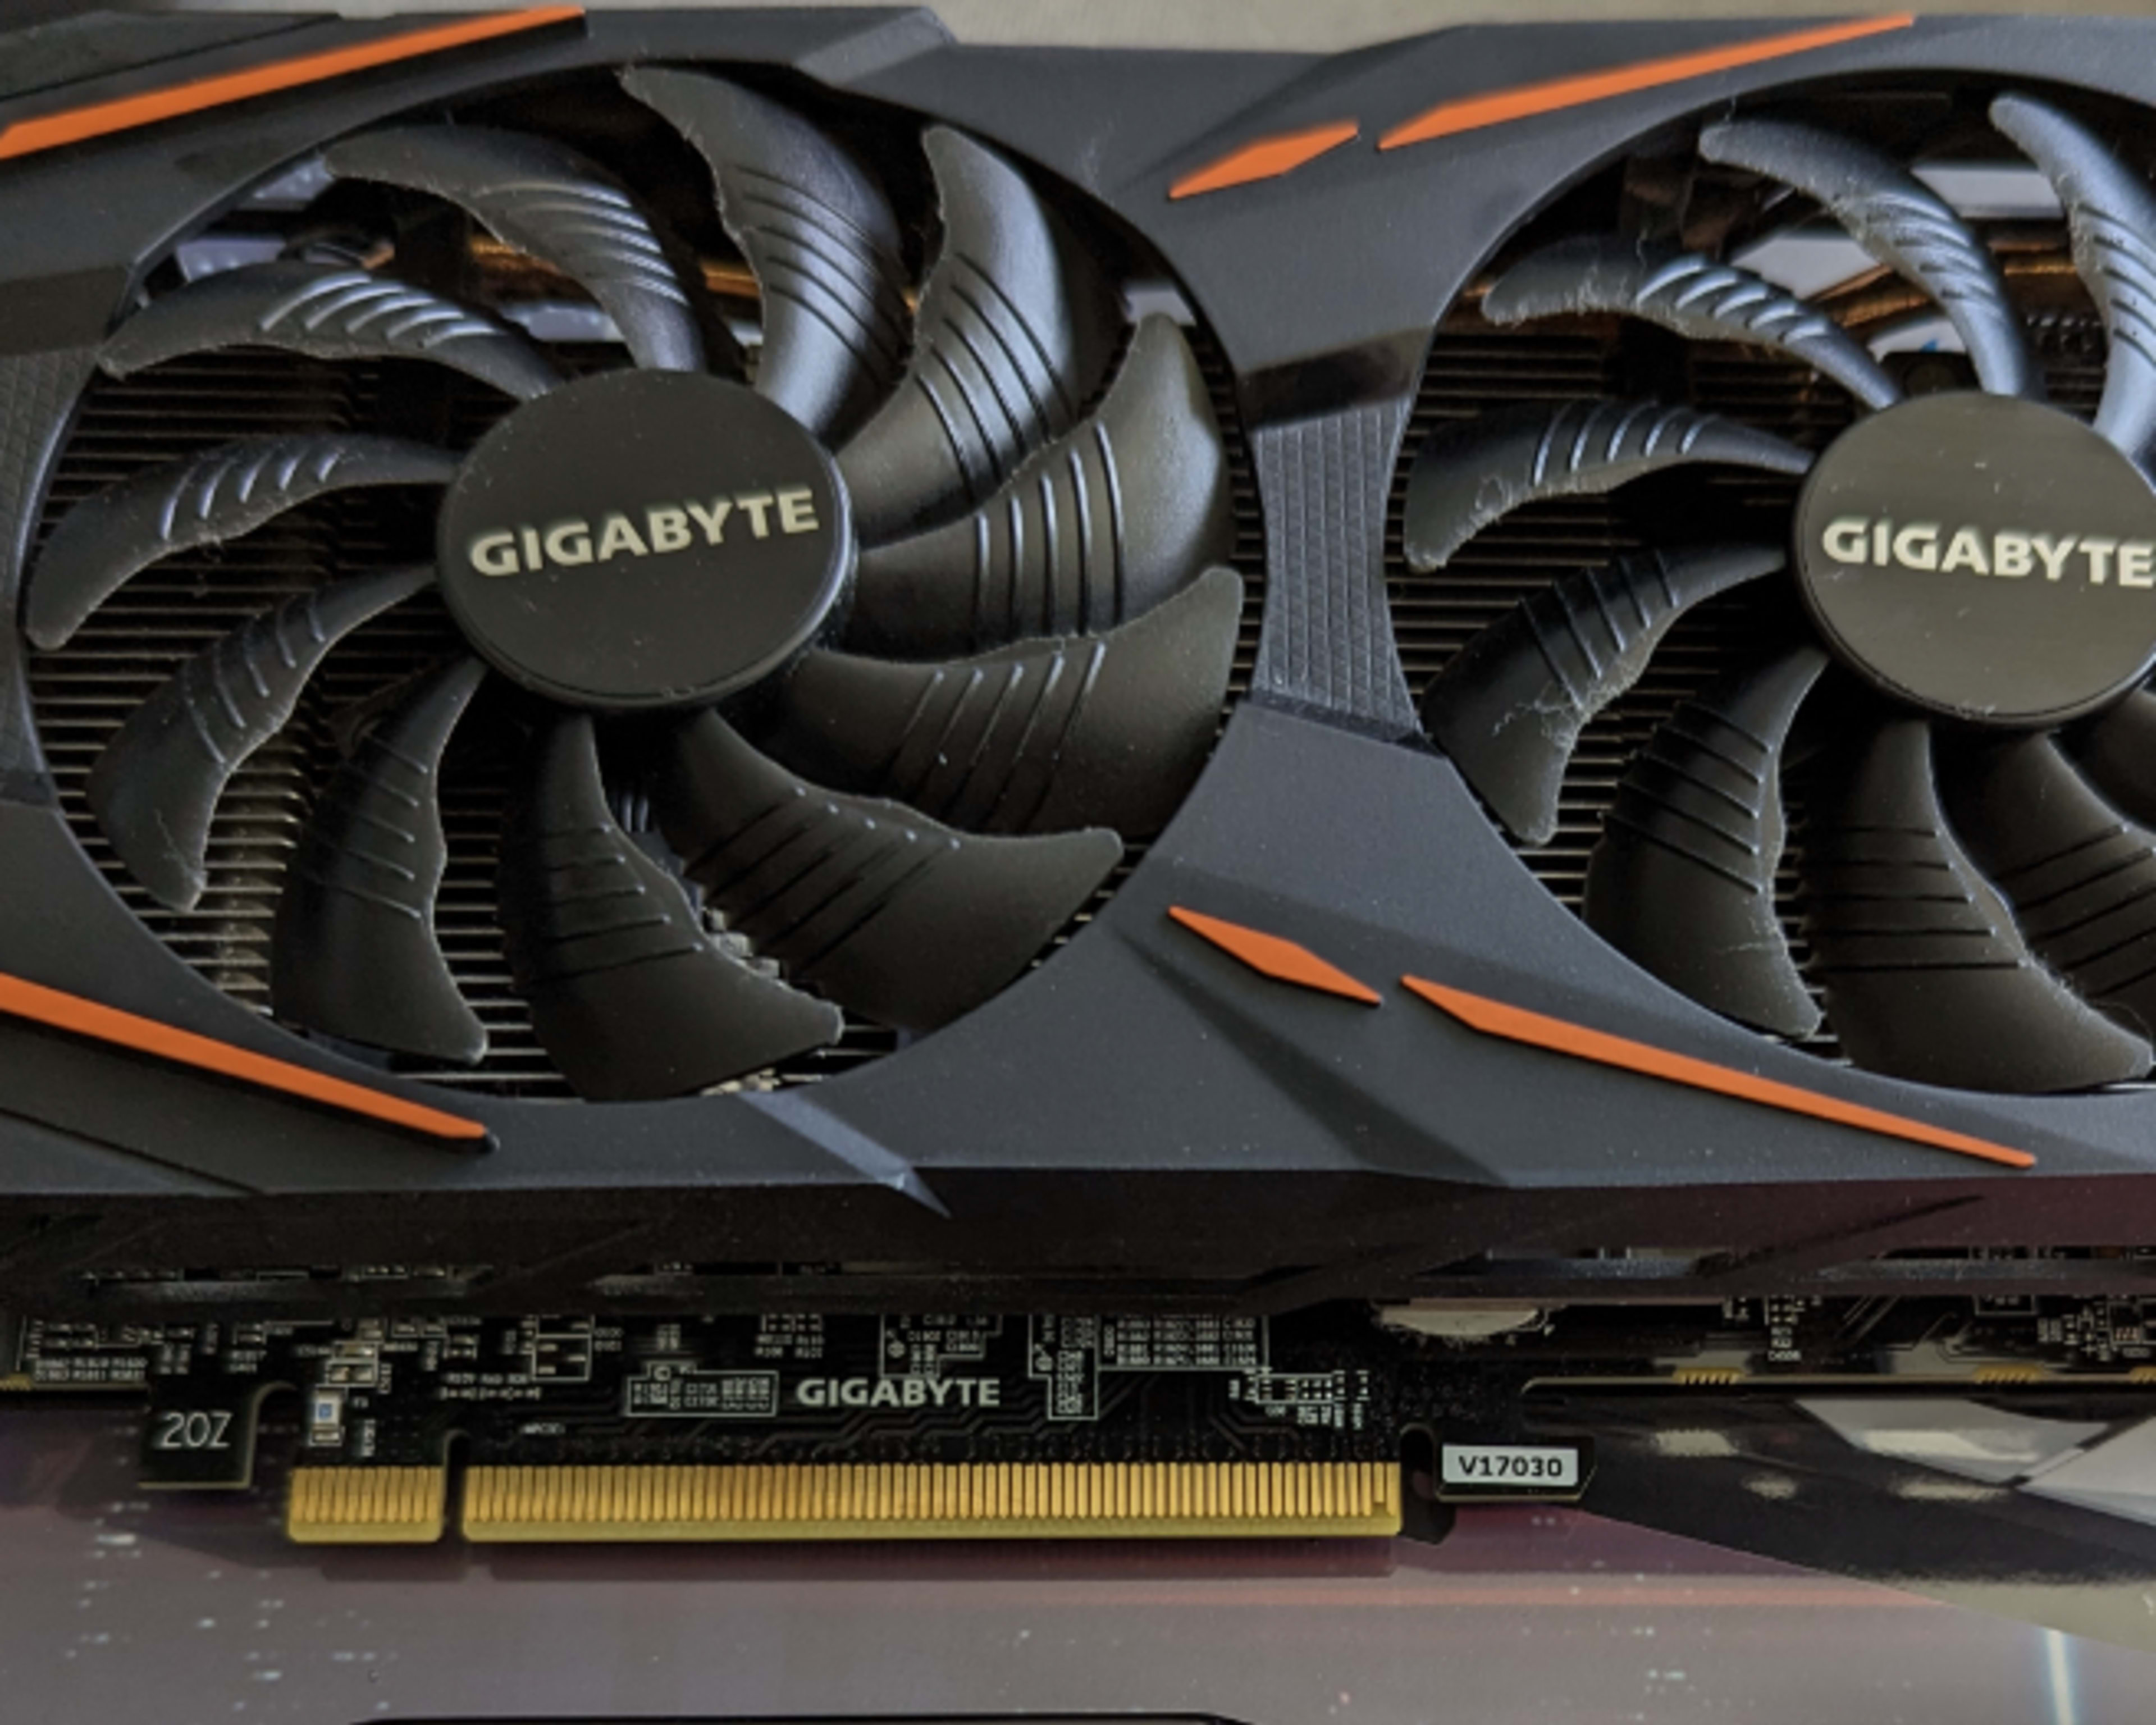 GIGABYTE RX 580 4GB Gaming Graphics Card